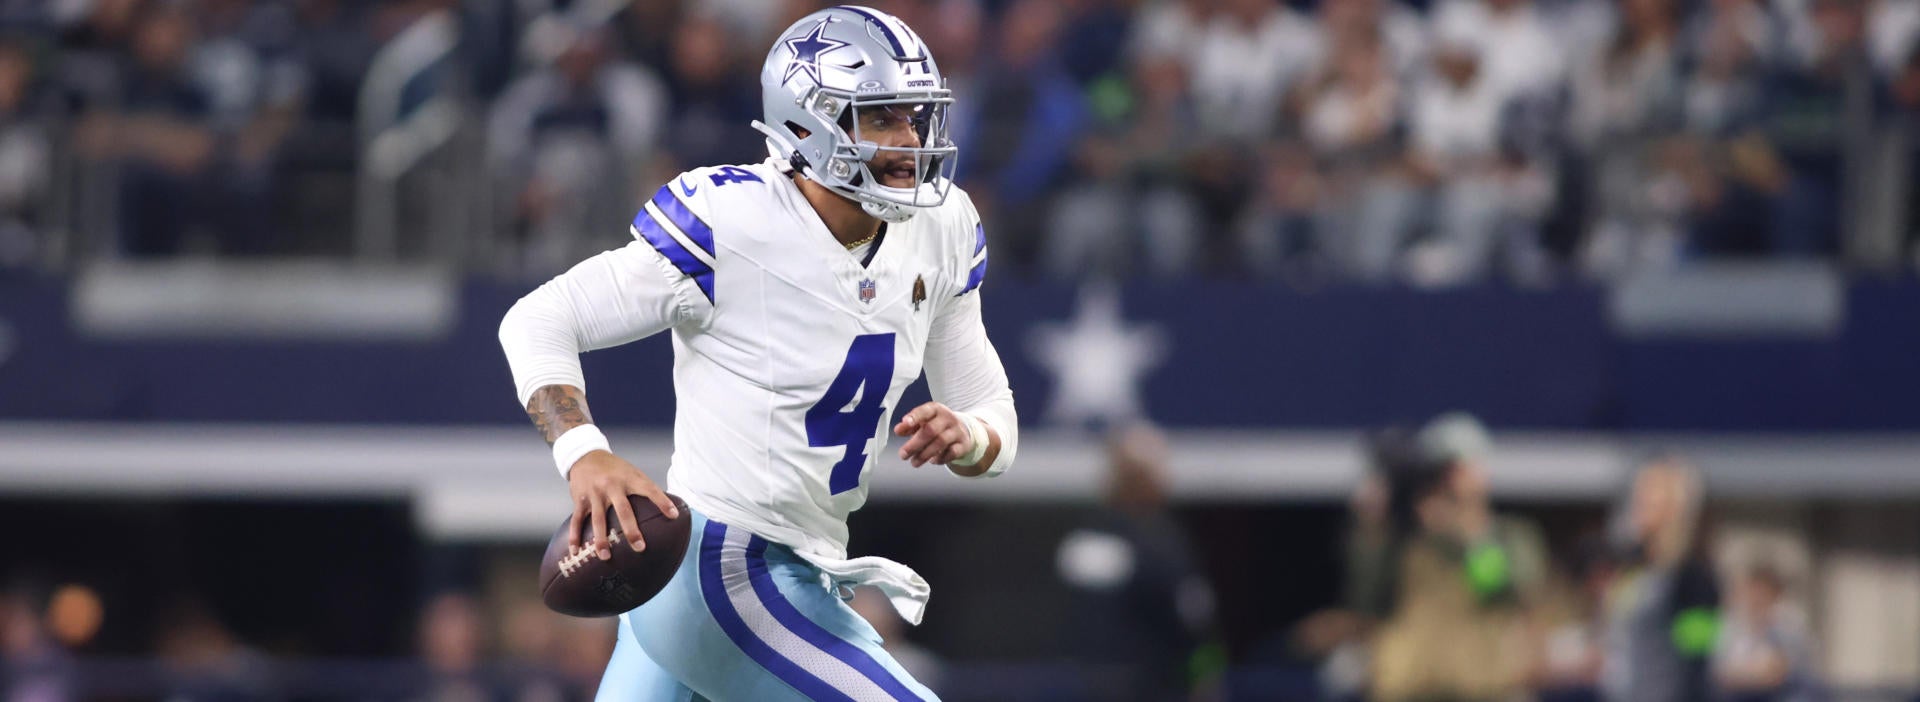 Lions vs. Cowboys odds, line: 2023 NFL picks, Week 17 predictions from proven computer model